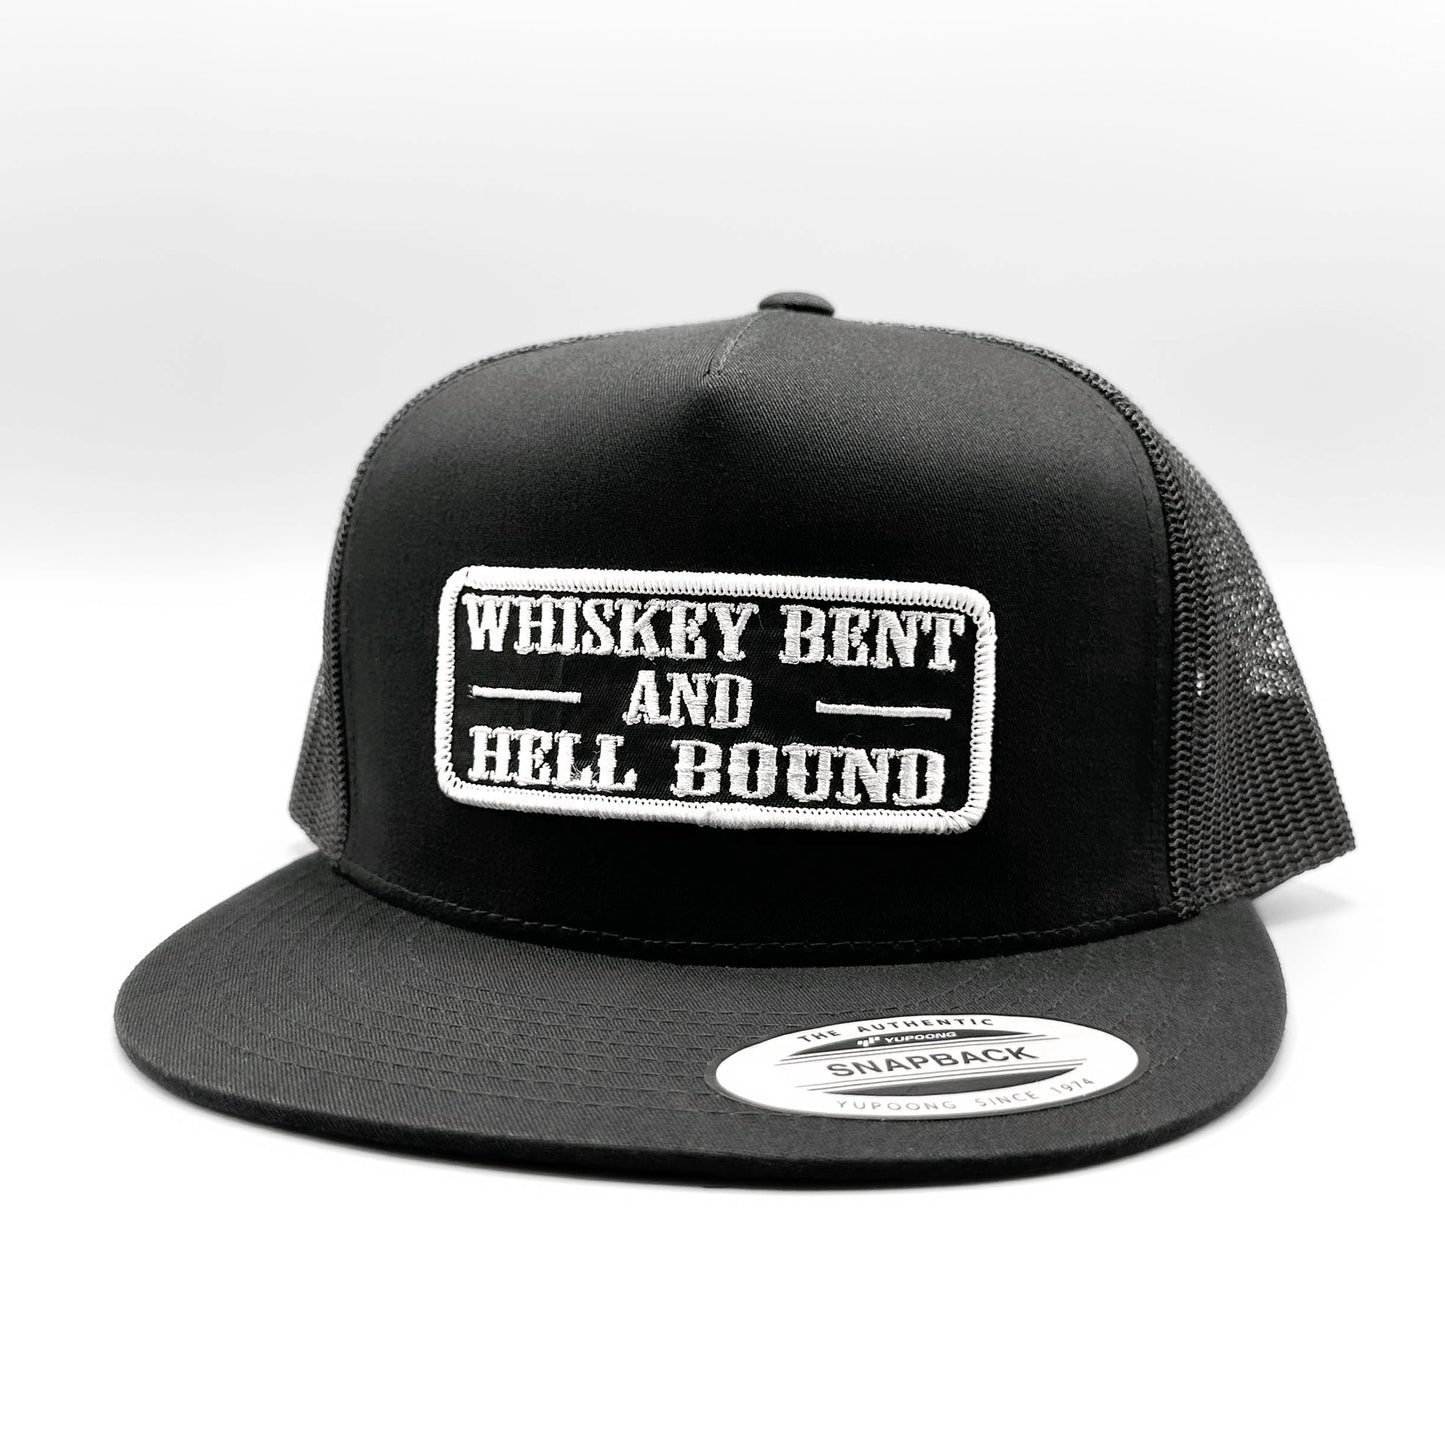 Whiskey Bent and Hell Bound Hank Jr. Trucker Hat